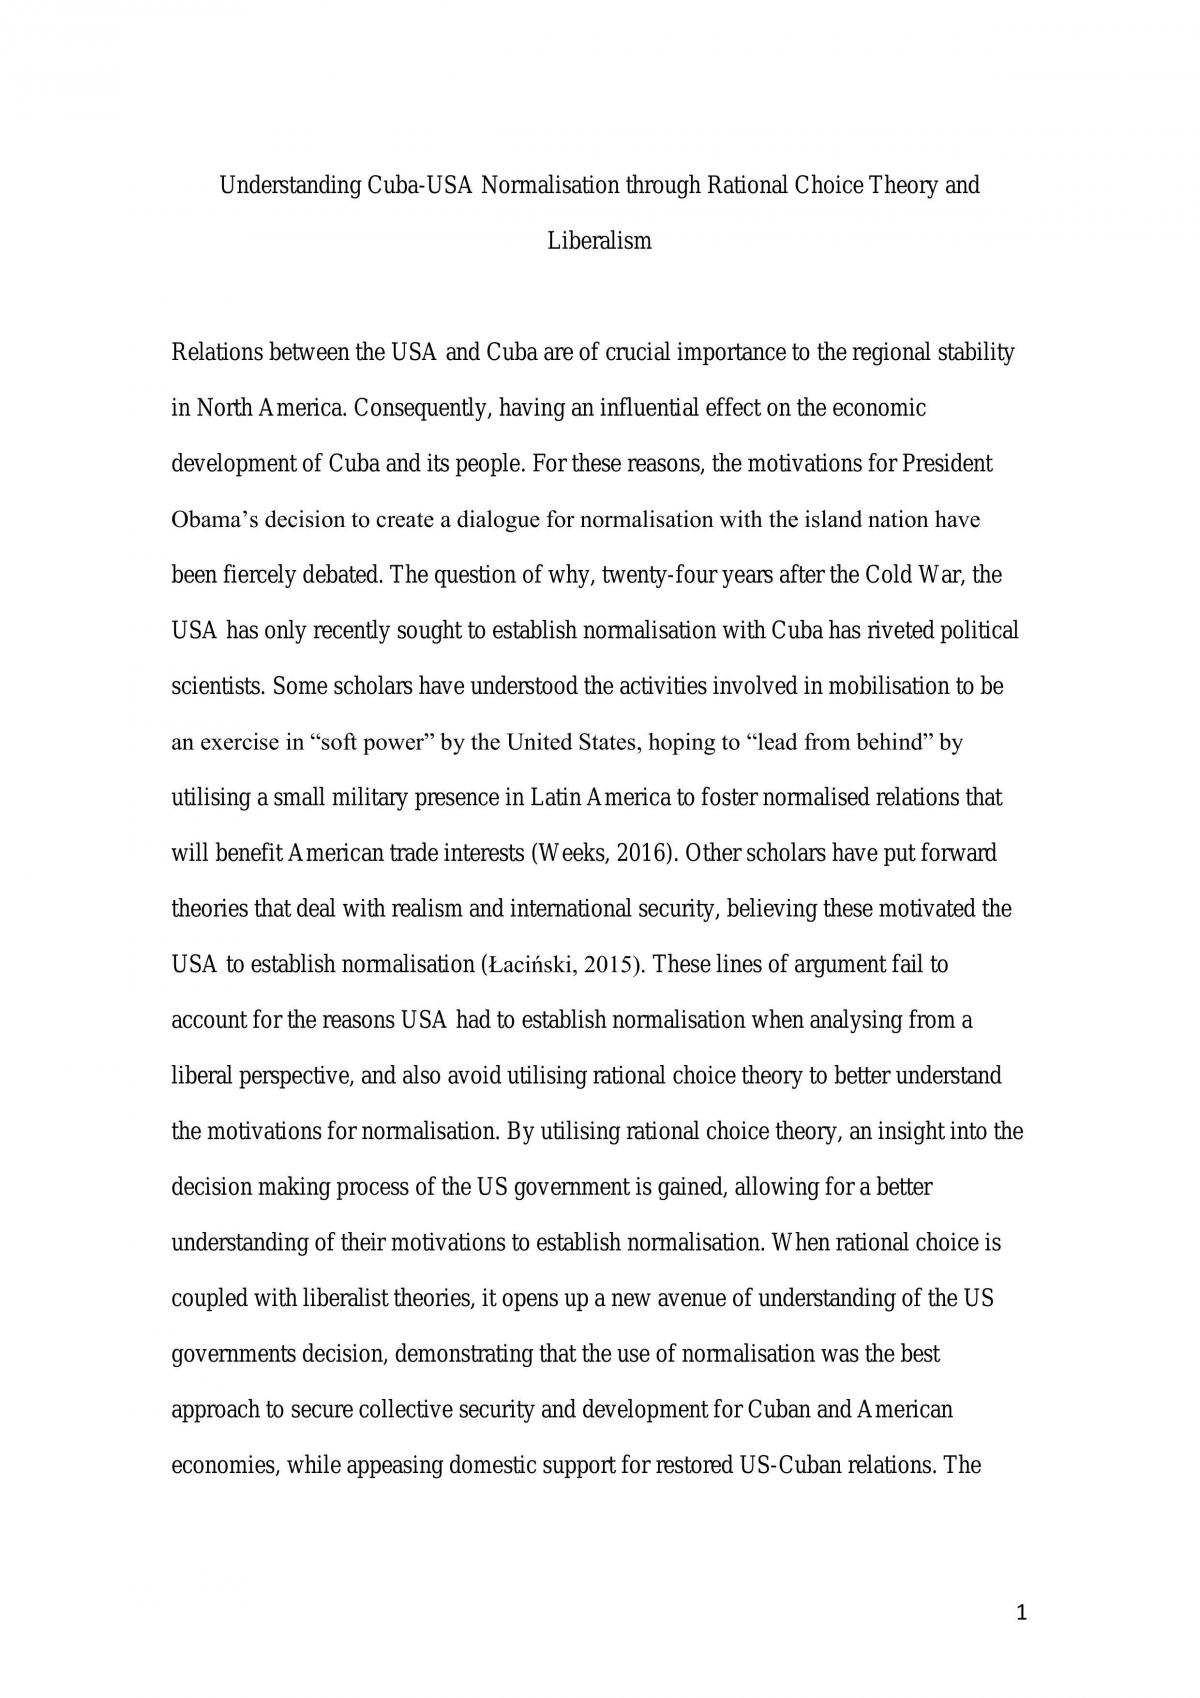 Cuba-US Relations through Rational Choice Theory and Liberalism - Page 1